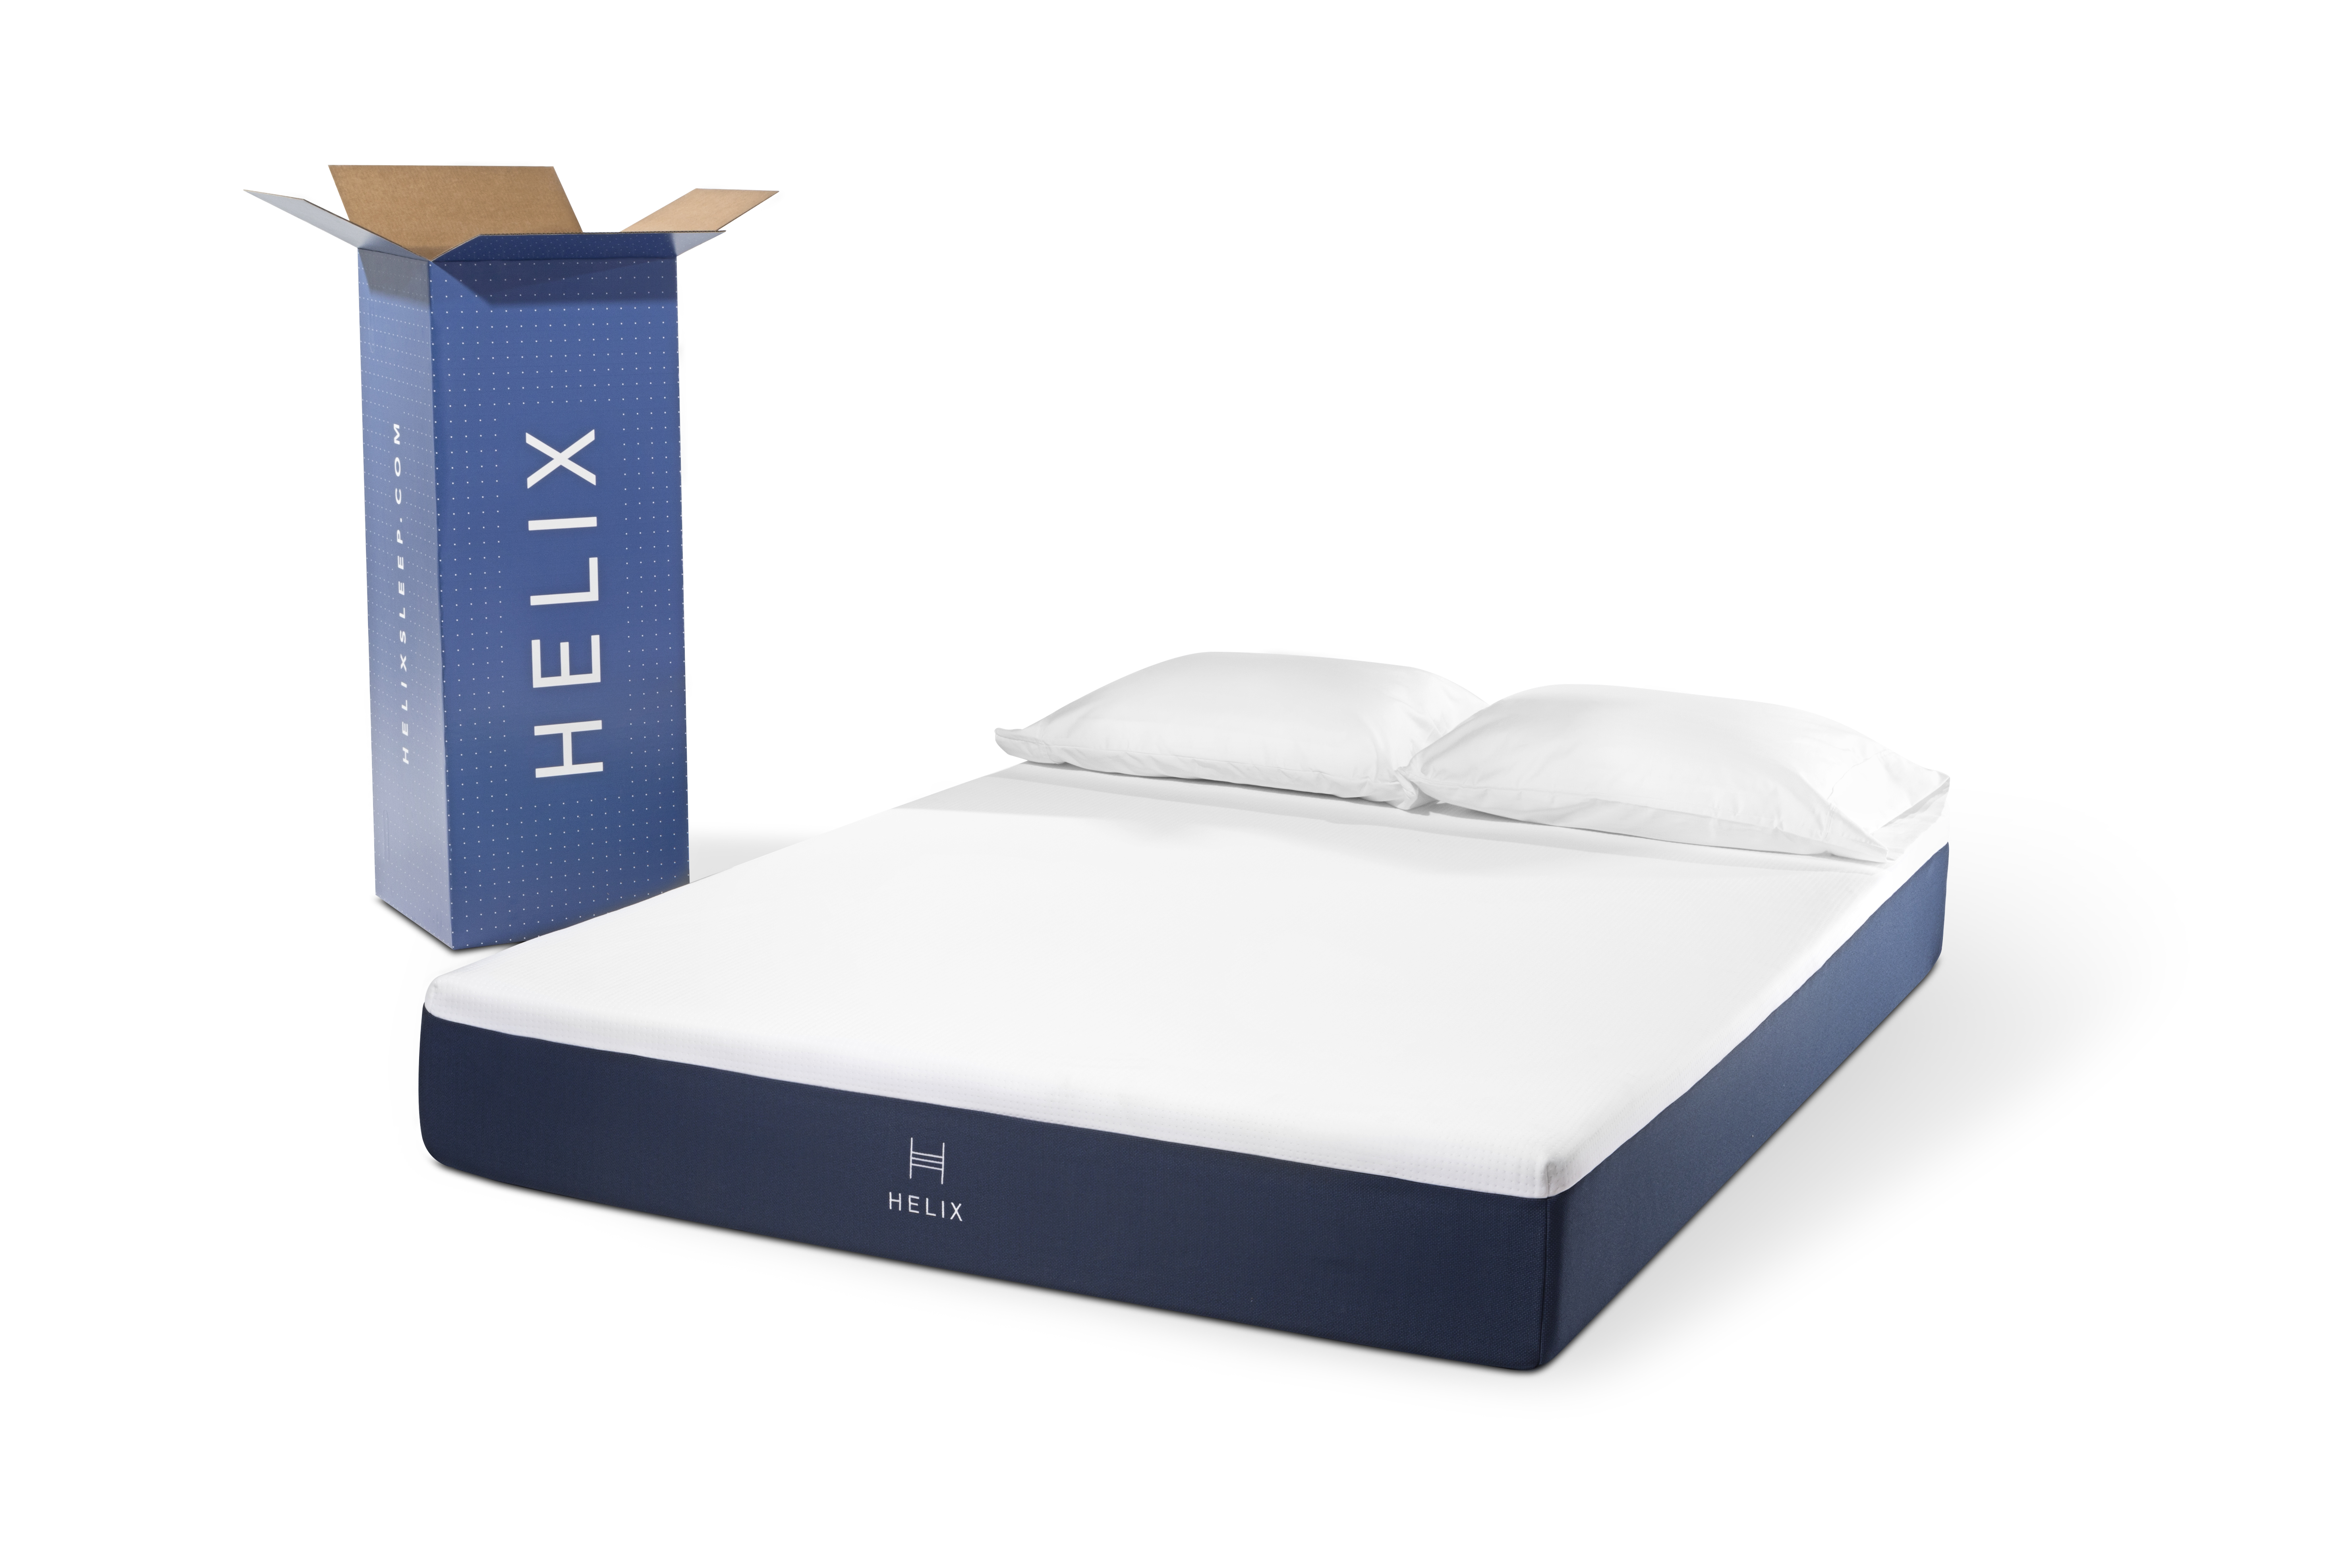 Best Practices For Unpacking A Helix Mattress